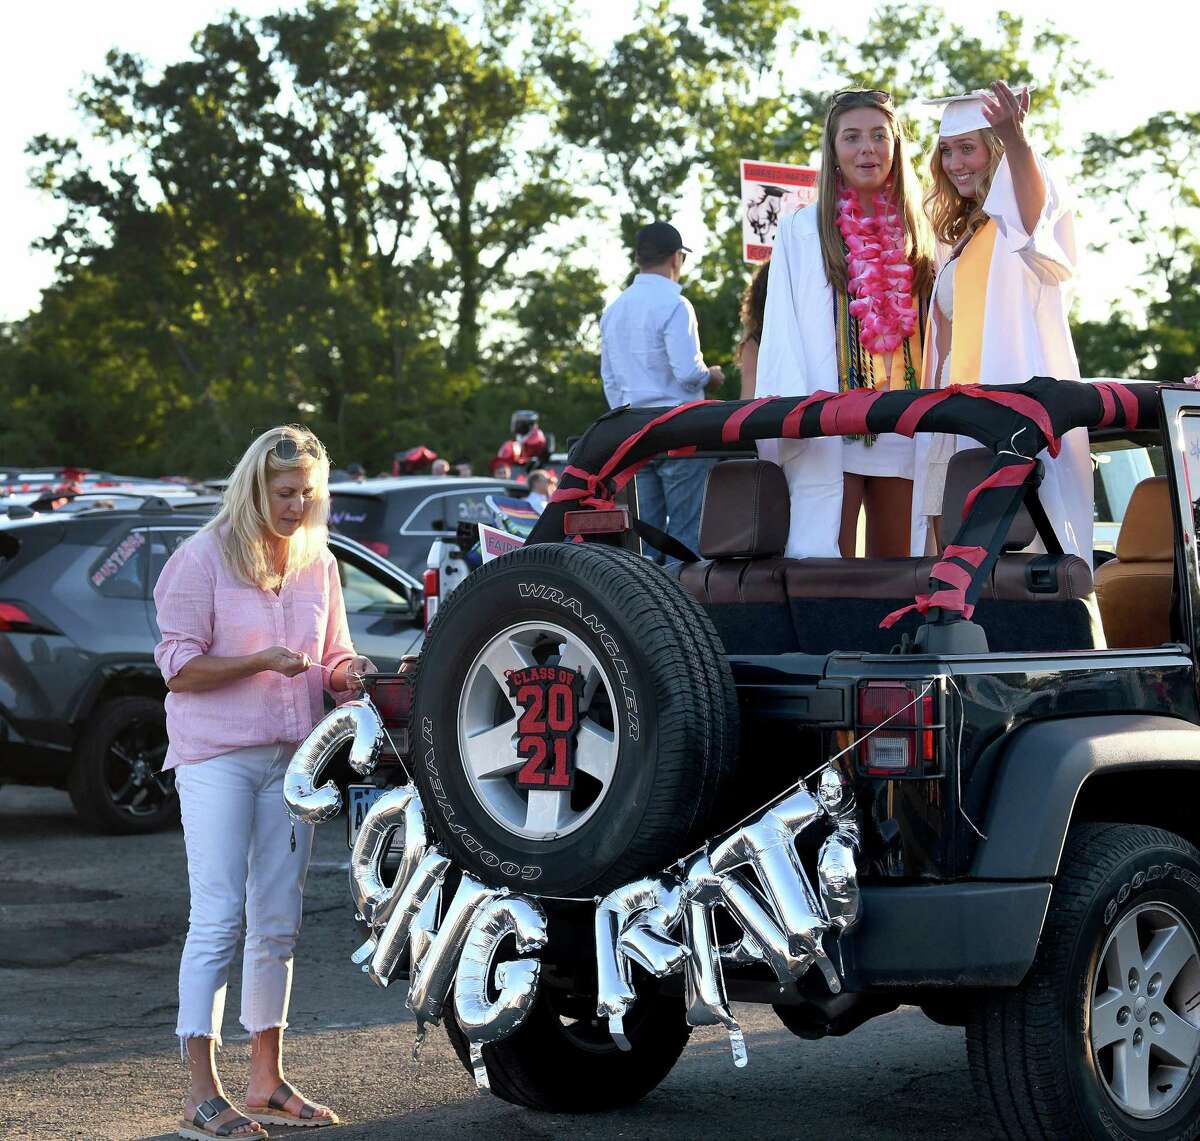 Susie Byrne decorates her car with a congratulations banner for her daughter, Brooke Byrne, with her friend Bridget Flanagan standing in the Jeep. Fairfield Warde High School held its graduation ceremony at Jennings Beach in Fairfield, Tuesday evening, June 15, 2021.